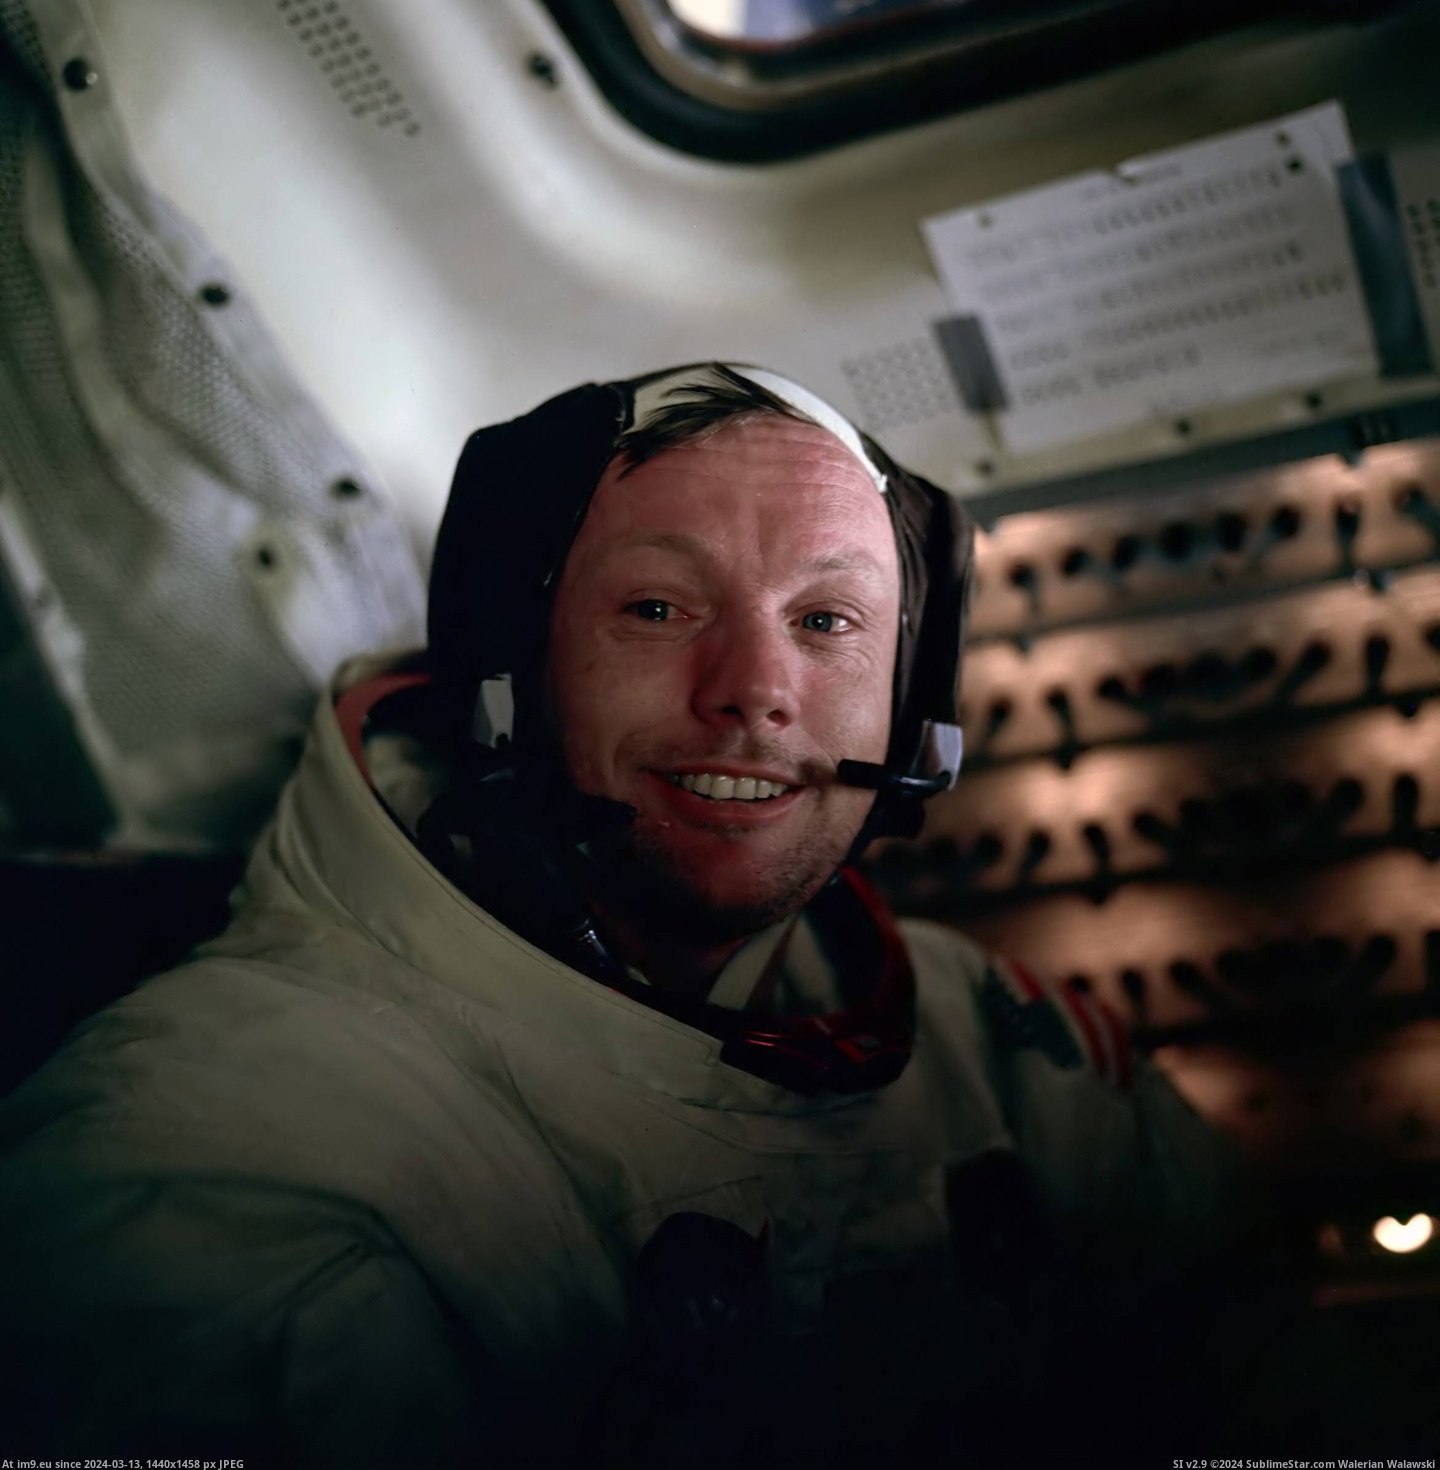 #Foot #Person #Step #Moments #Aldrin #Armstrong #Teary #Photographed #Eyed #Buzz #Neil [Pics] A teary-eyed Neil Armstrong photographed by Buzz Aldrin just moments after being the first person to ever step foot on th Pic. (Image of album My r/PICS favs))